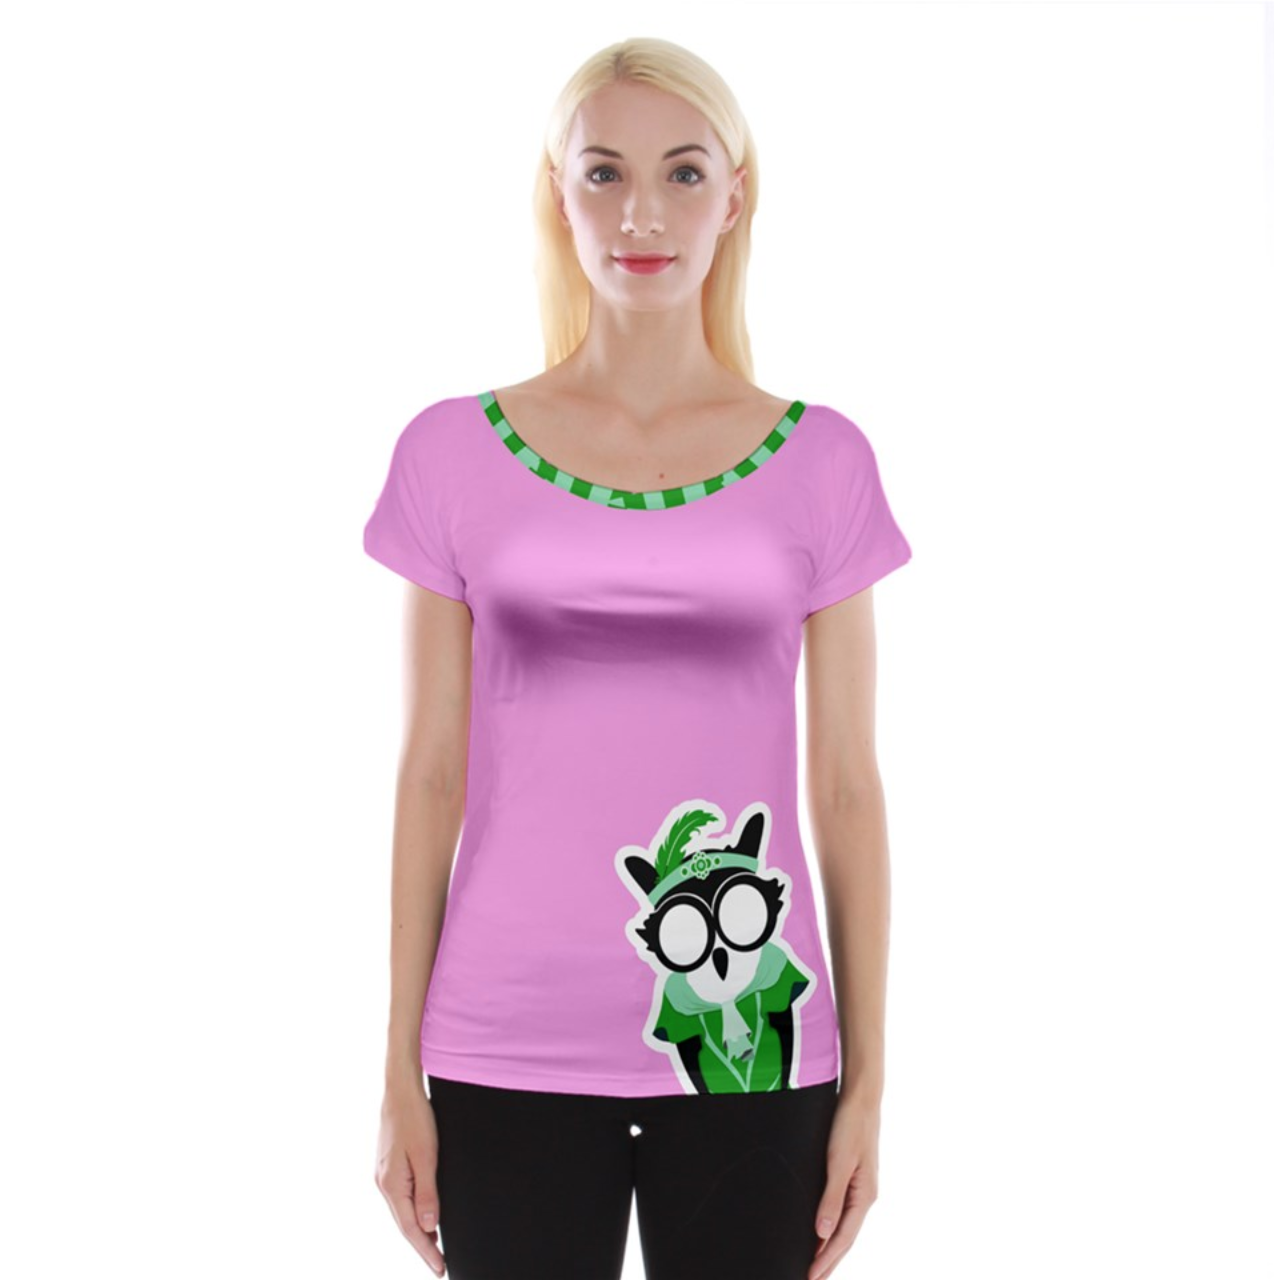 Candy Store Owl (large owl) Cap Sleeve Top